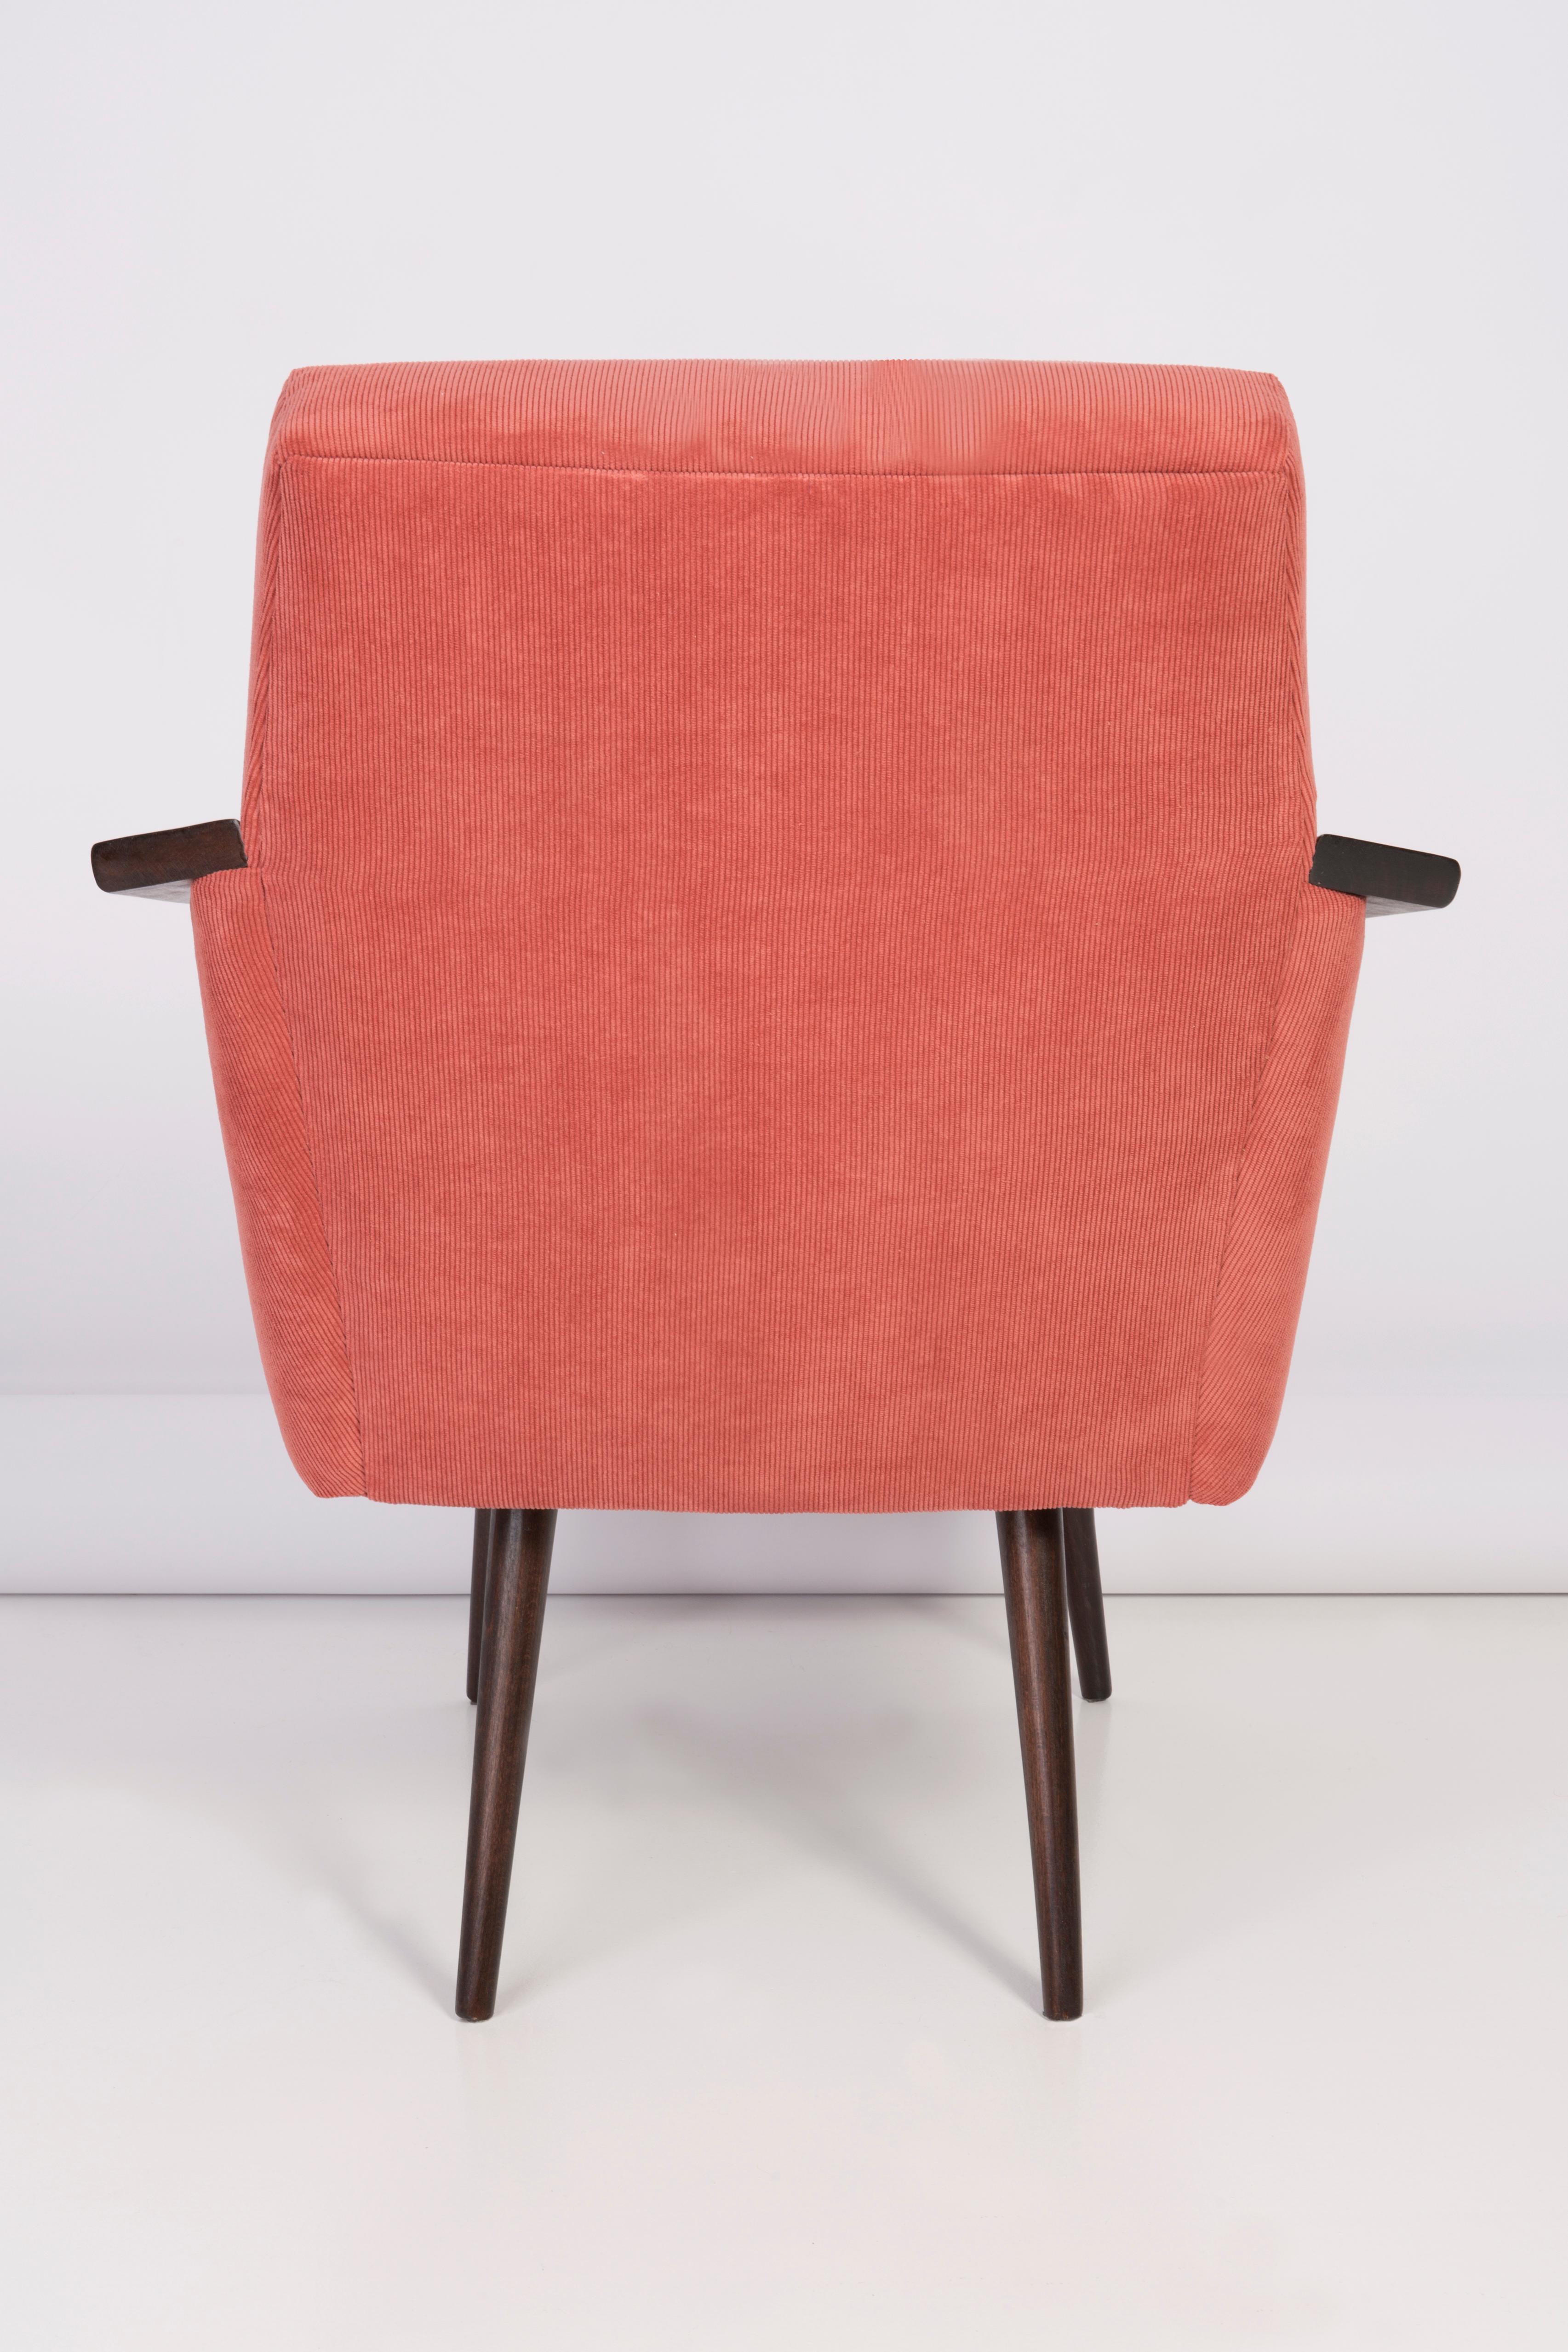 Midcentury Rosewood Pink Corduroy Club Armchair, 1960s In Excellent Condition For Sale In 05-080 Hornowek, PL